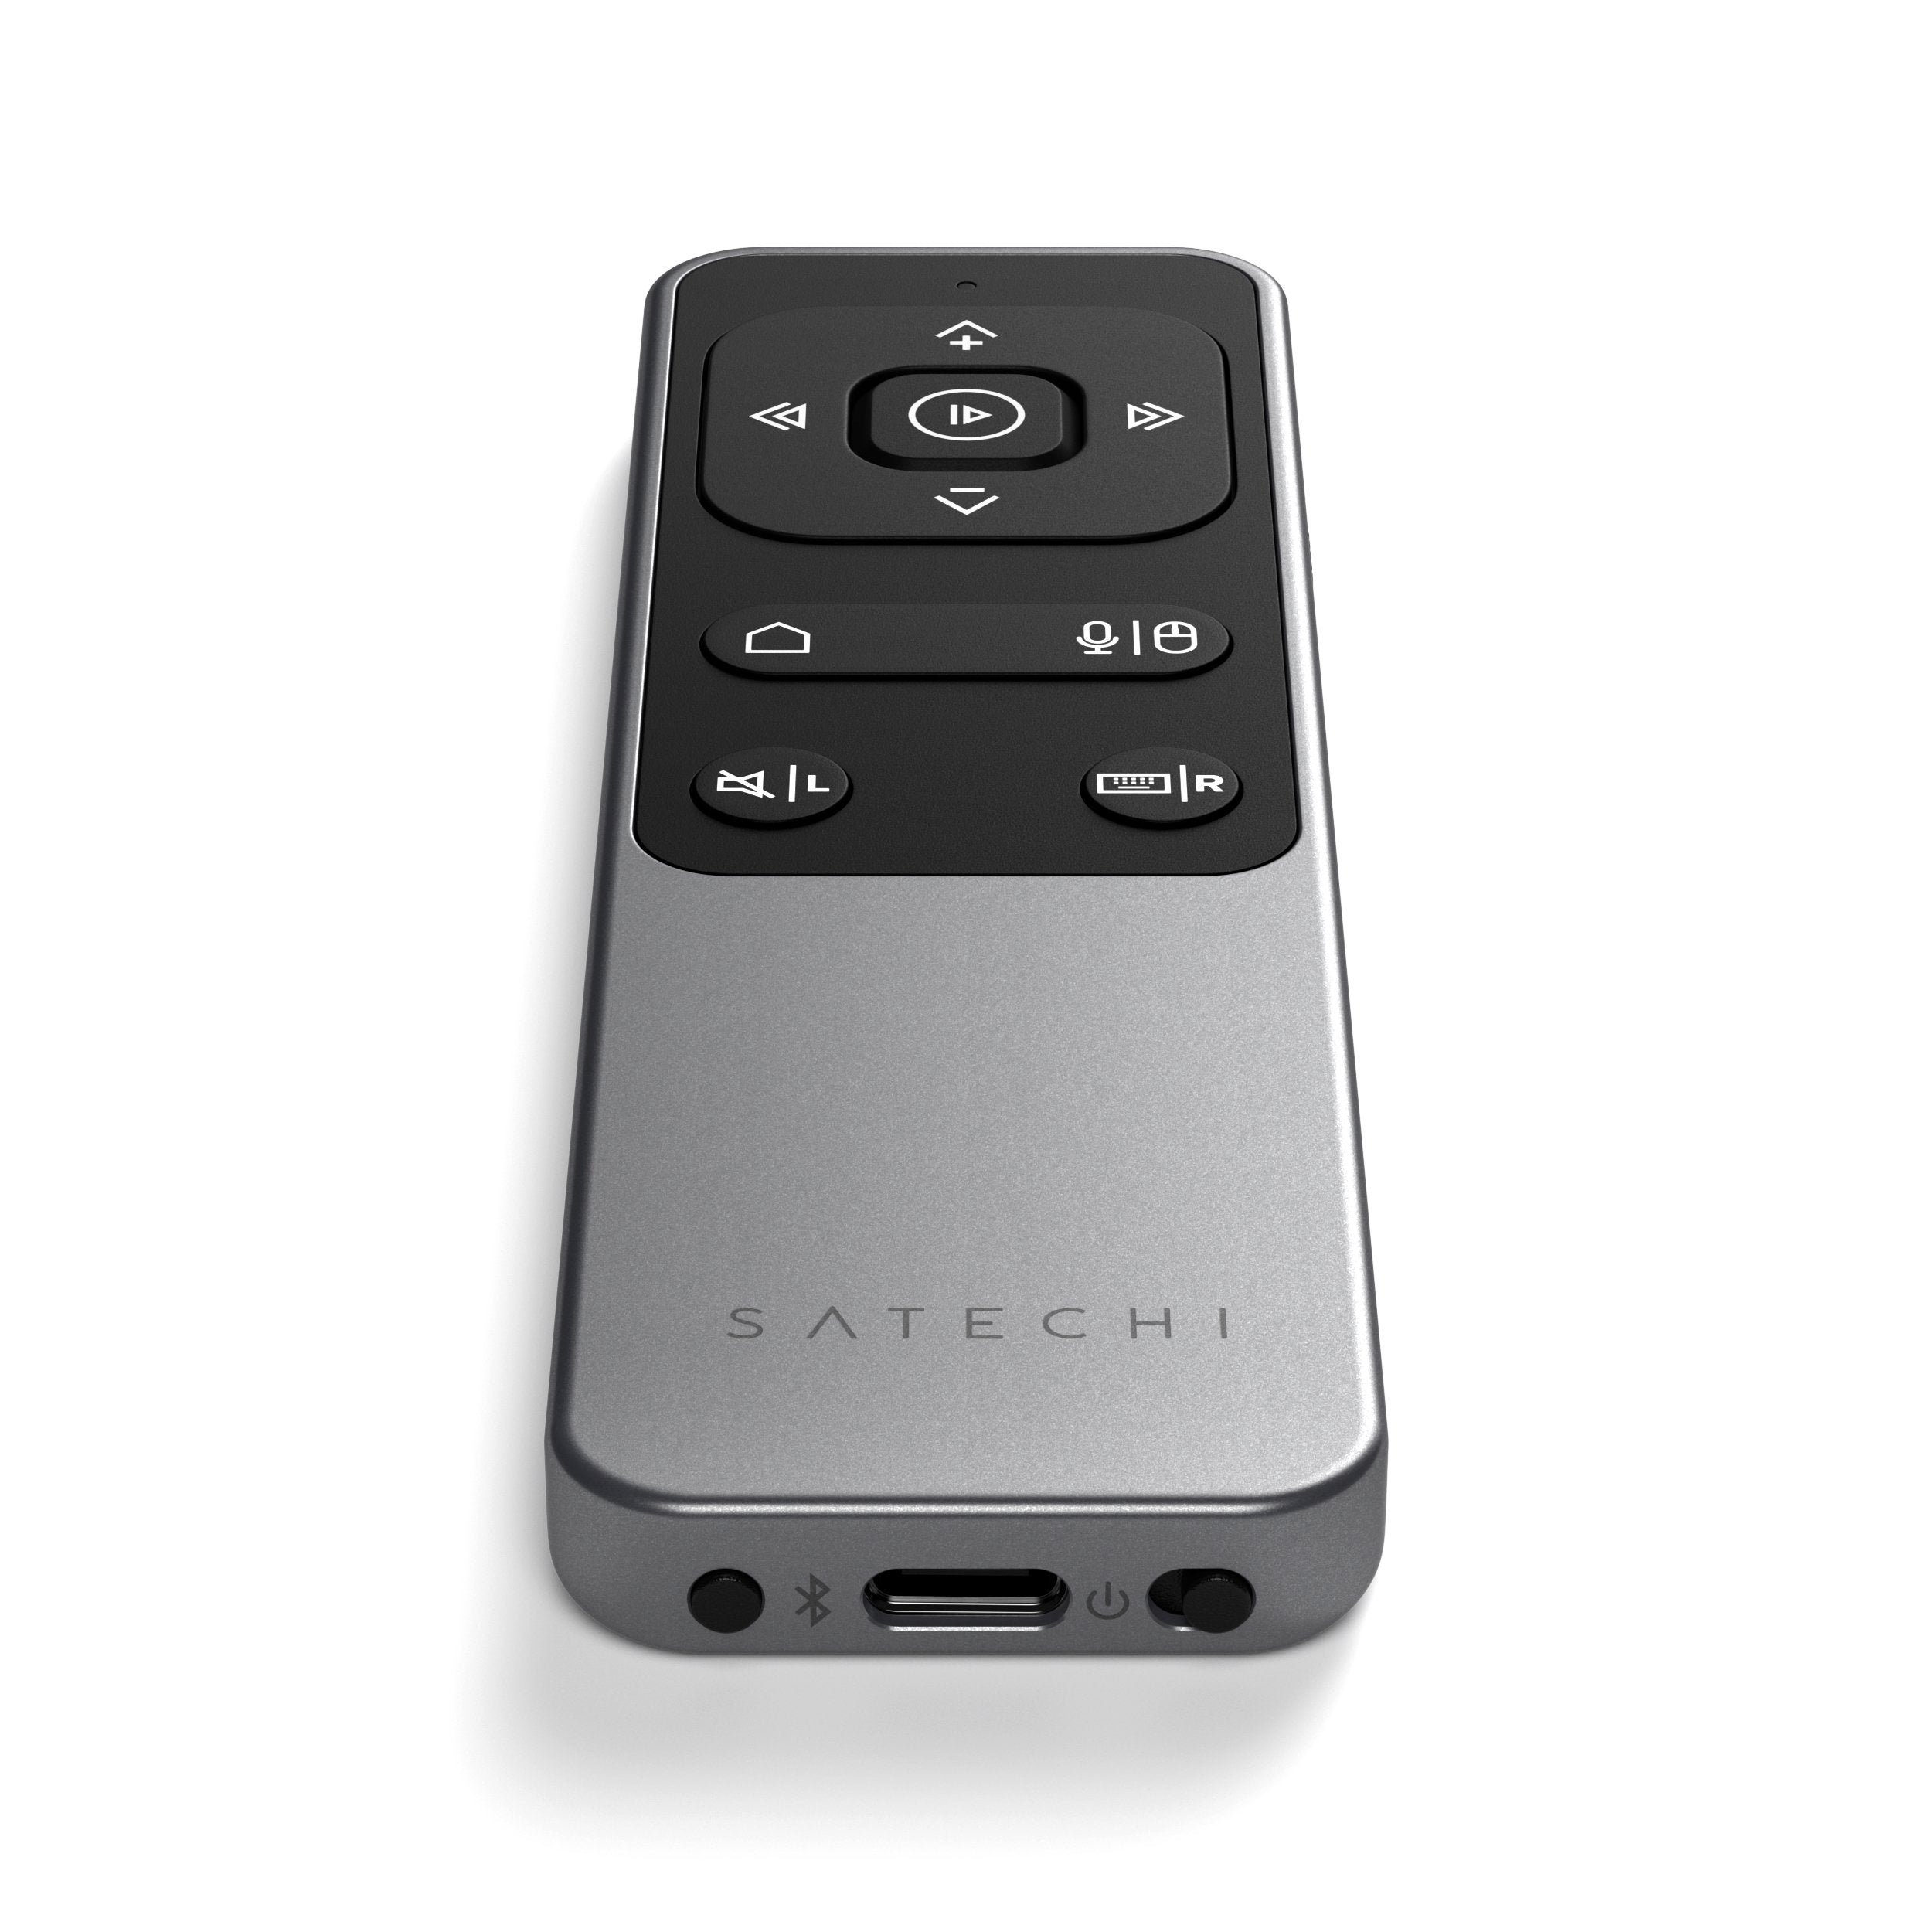 https://cdn.shopify.com/s/files/1/1520/4366/products/r2-bluetooth-multimedia-remote-control-remotes-satechi-712420.jpg?v=1611942925